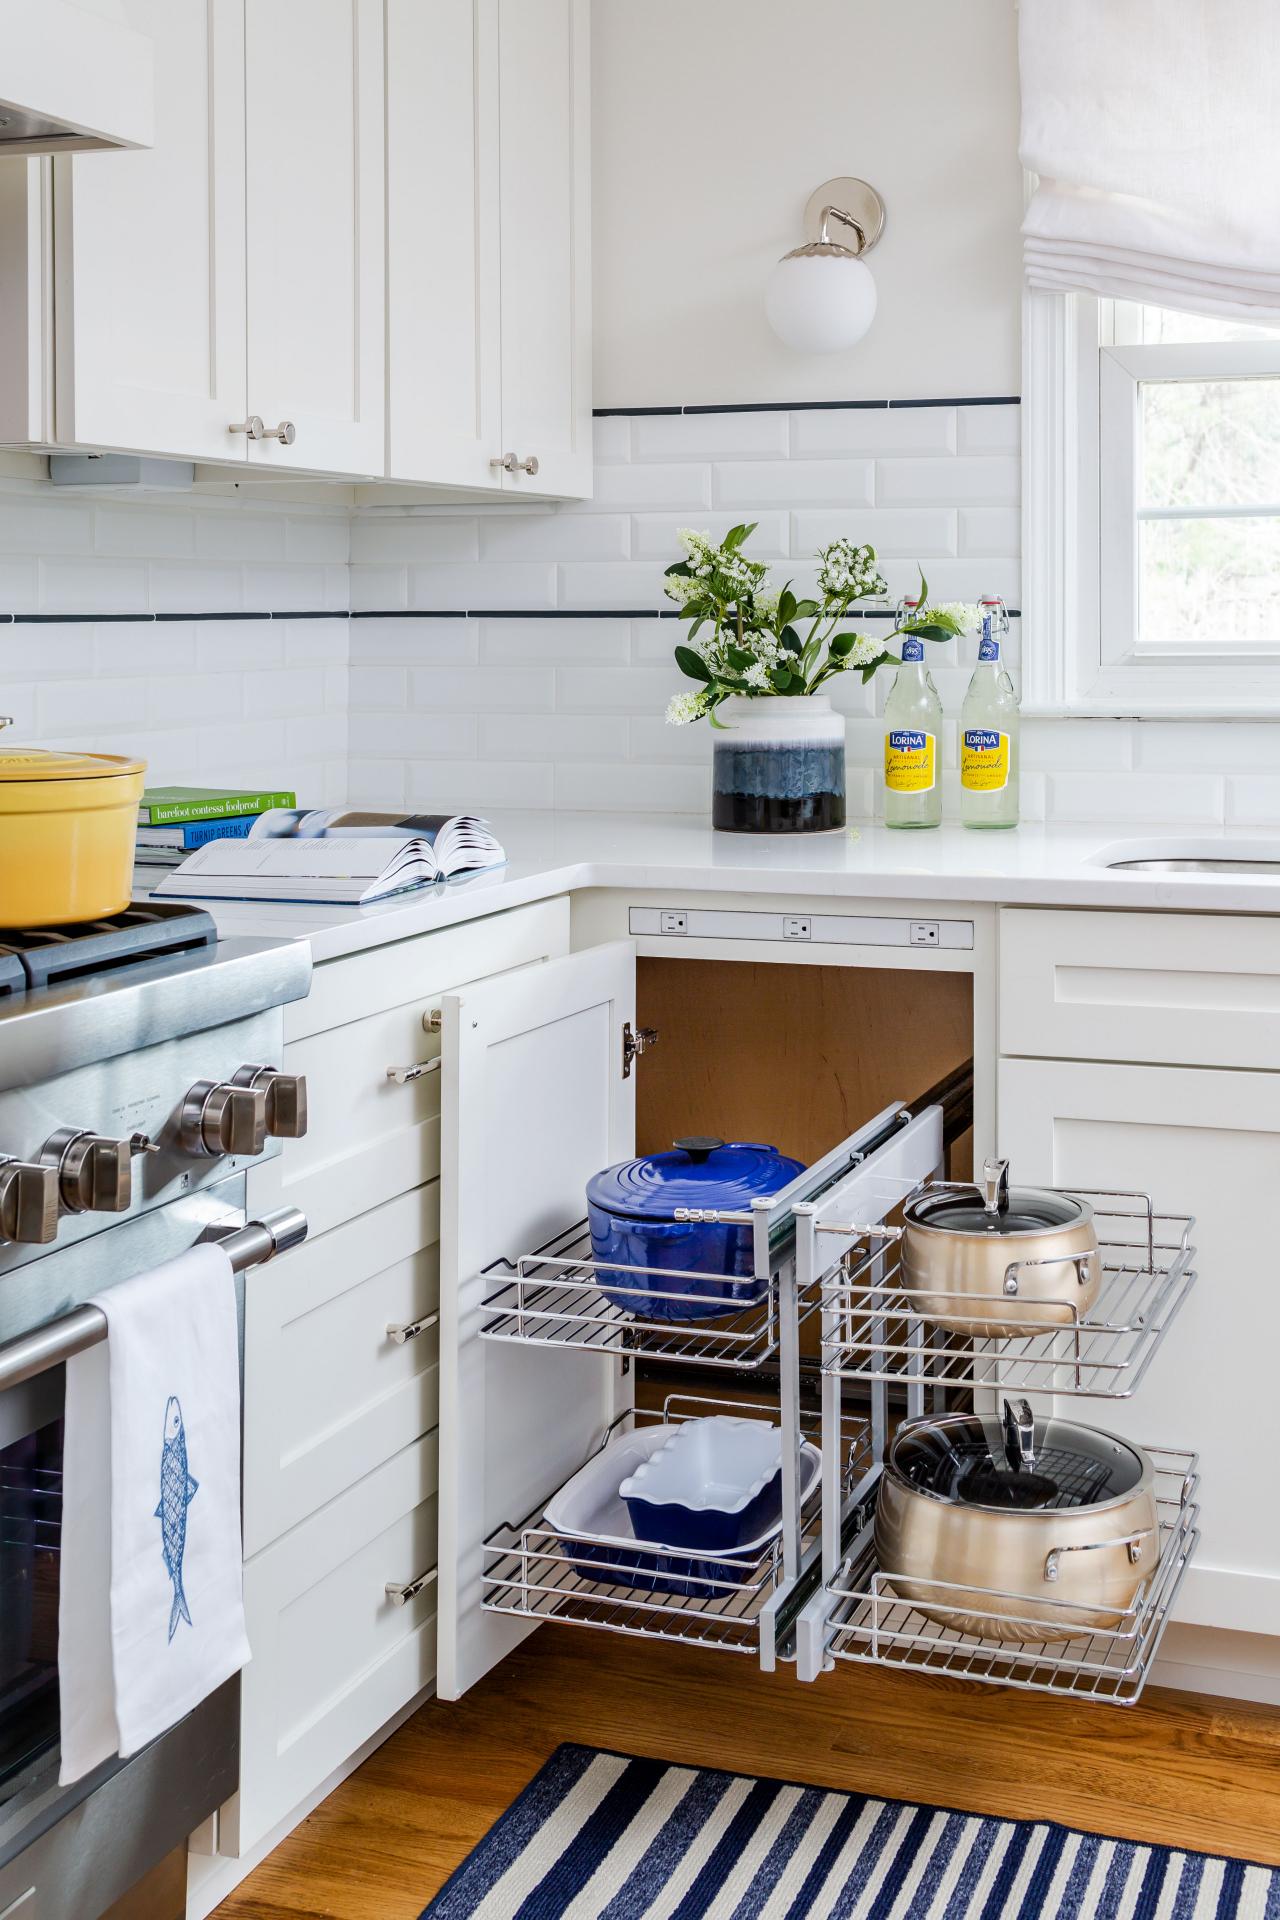 How to Organize the Inside of Your Kitchen Cabinets